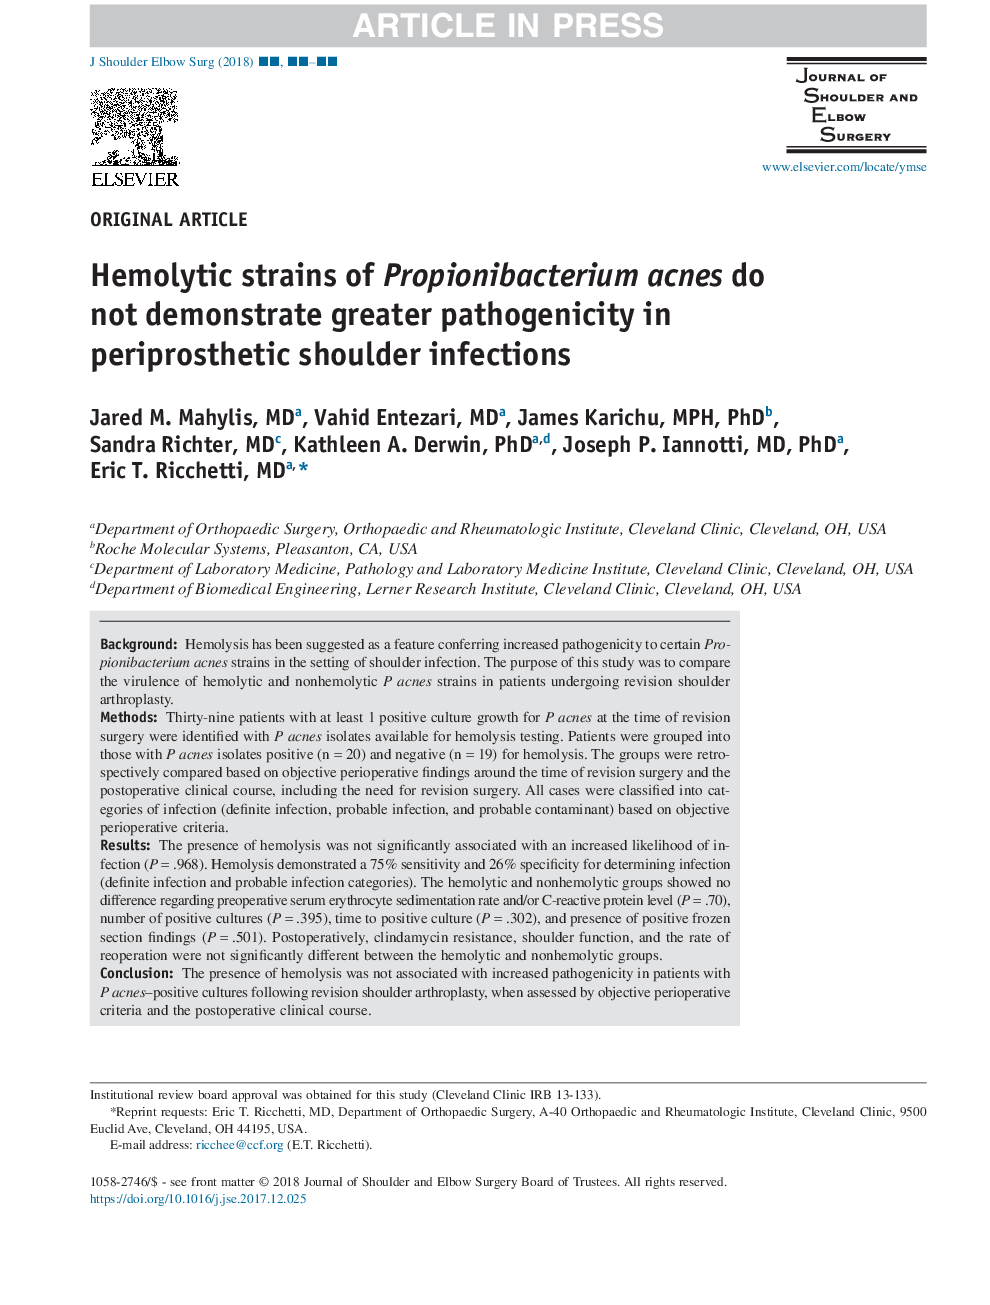 Hemolytic strains of Propionibacterium acnes do not demonstrate greater pathogenicity in periprosthetic shoulder infections